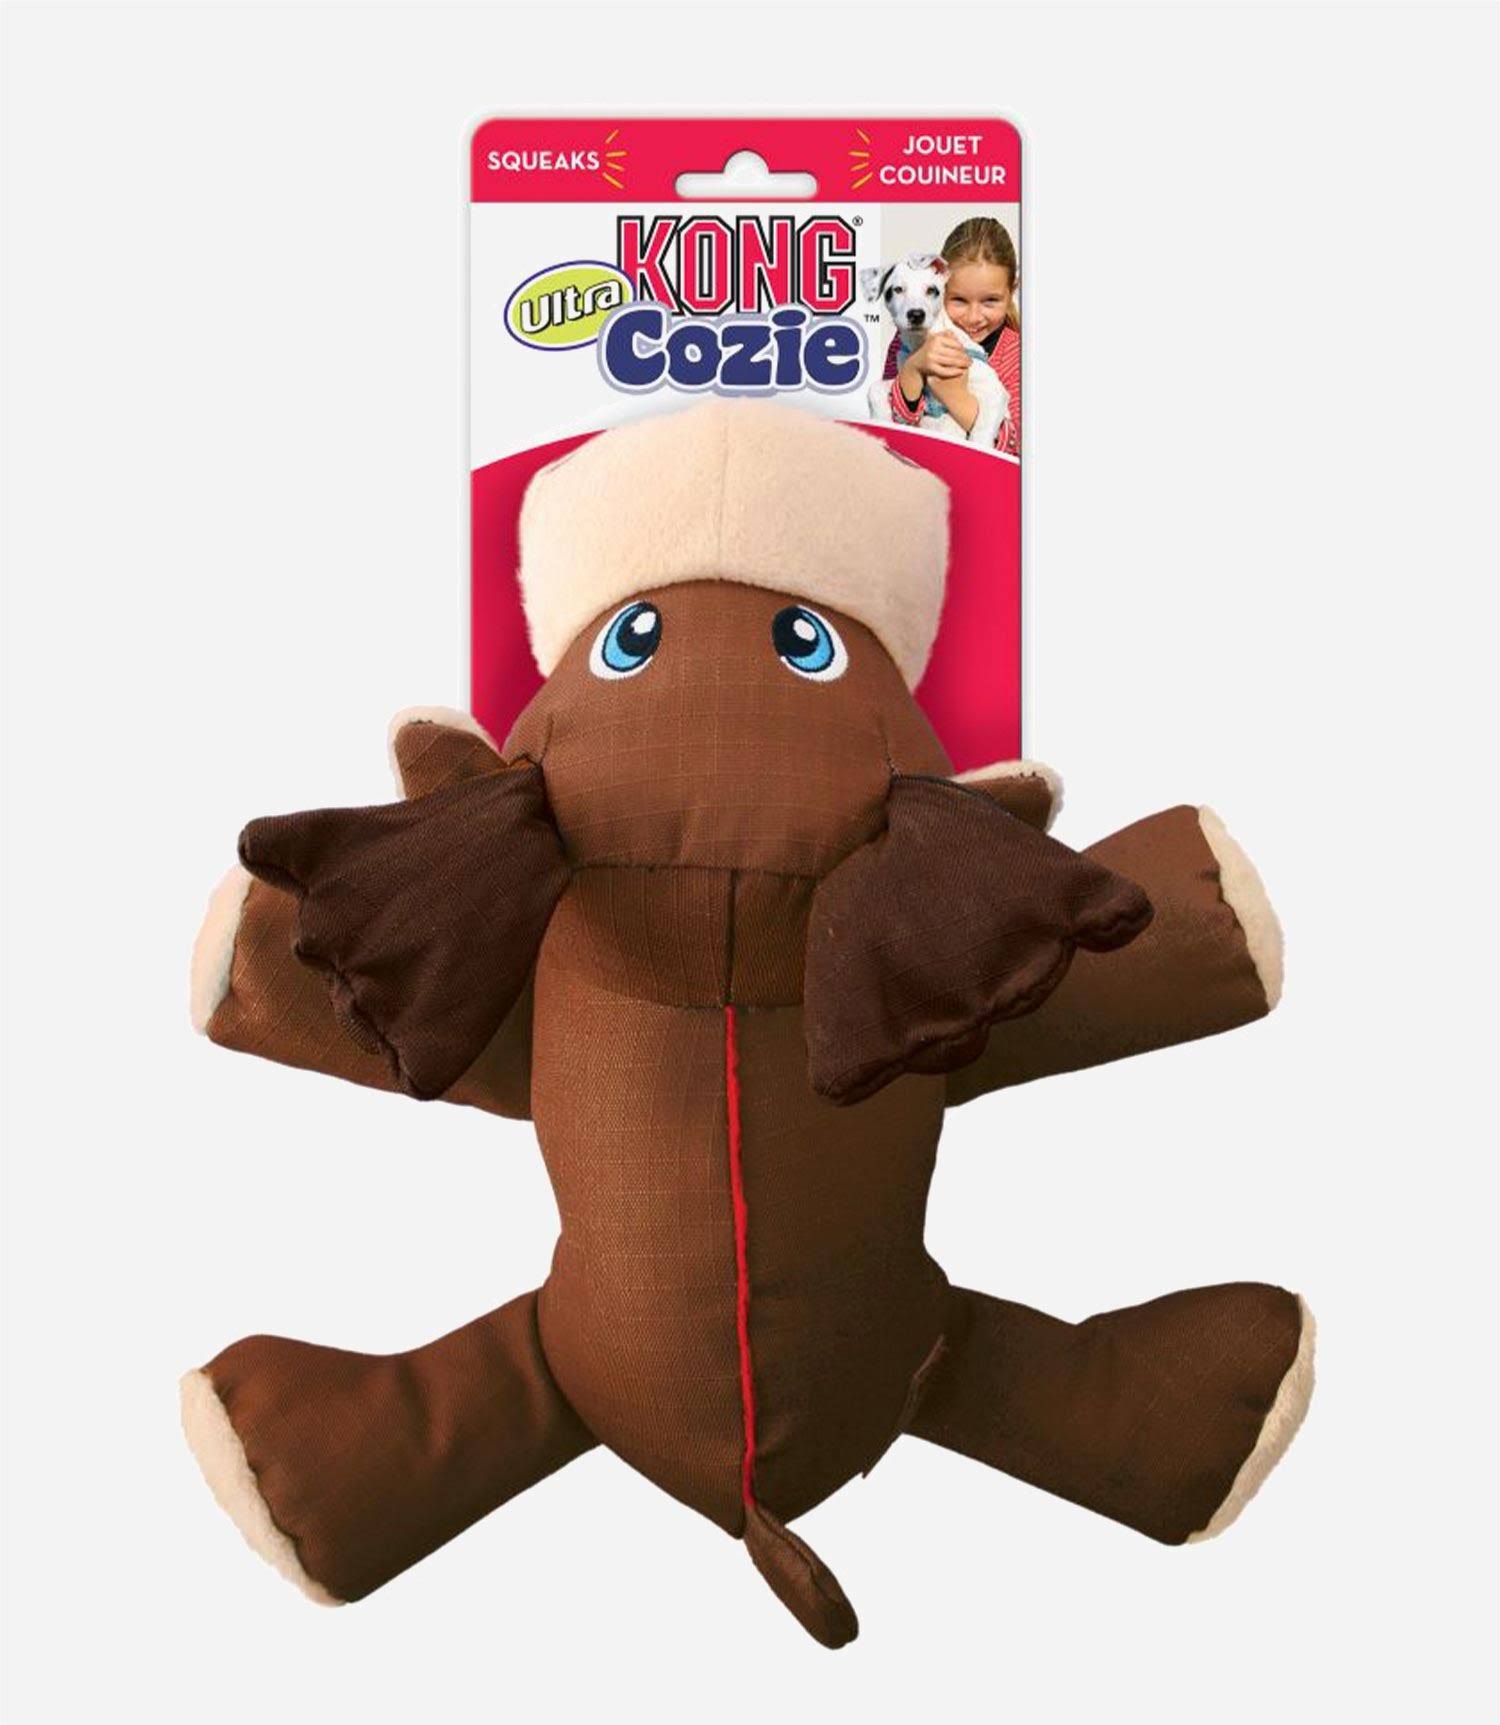 Kong Cozie Ultra Max Moose Dog Toy